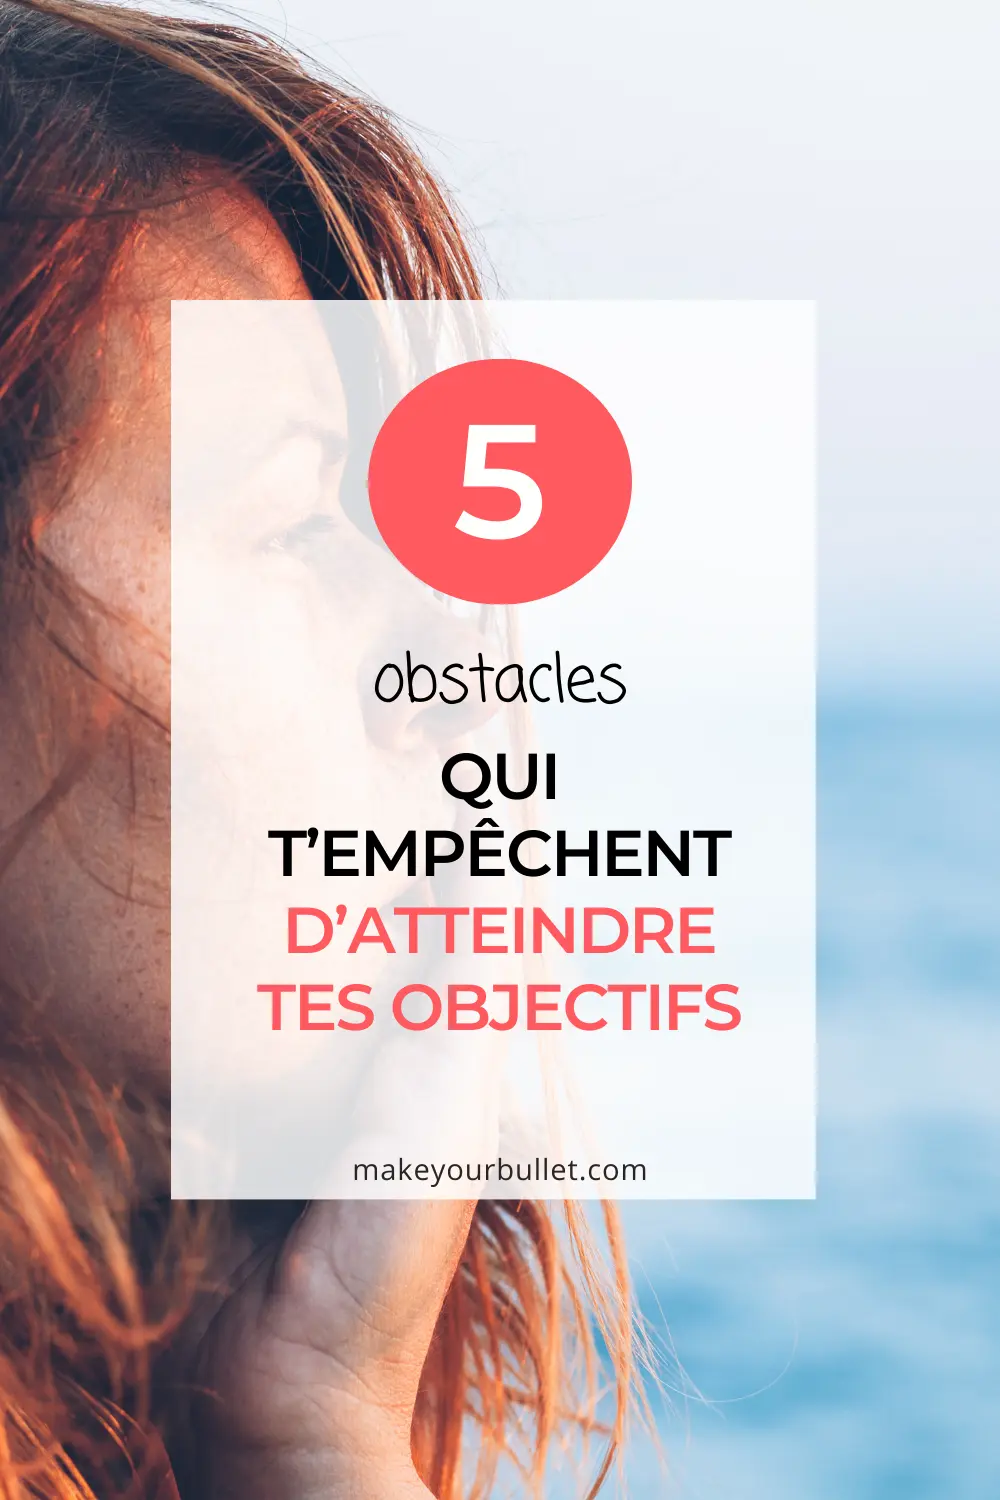 5-obstacles-atteindre-tes-objectifs-et-solutions-bullet-journal